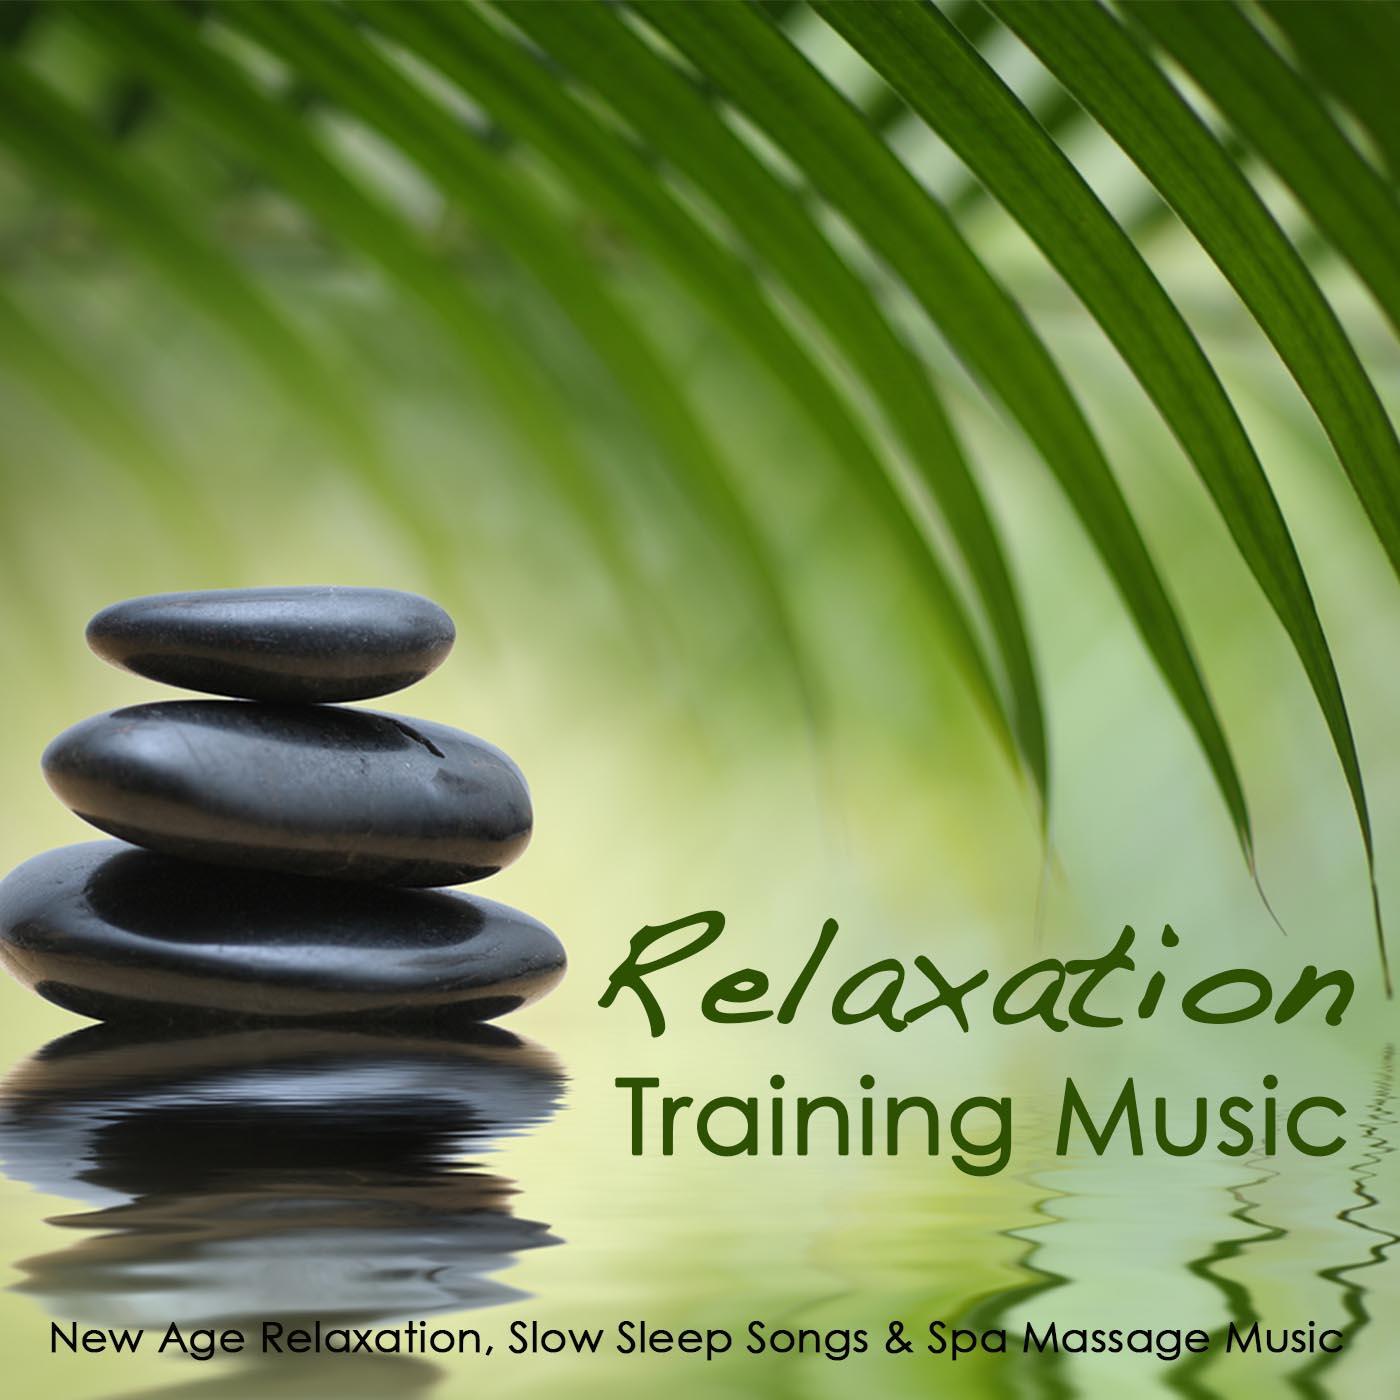 Relaxation Training Music - New Age Relaxation, Slow Sleep Songs & Spa Massage Music